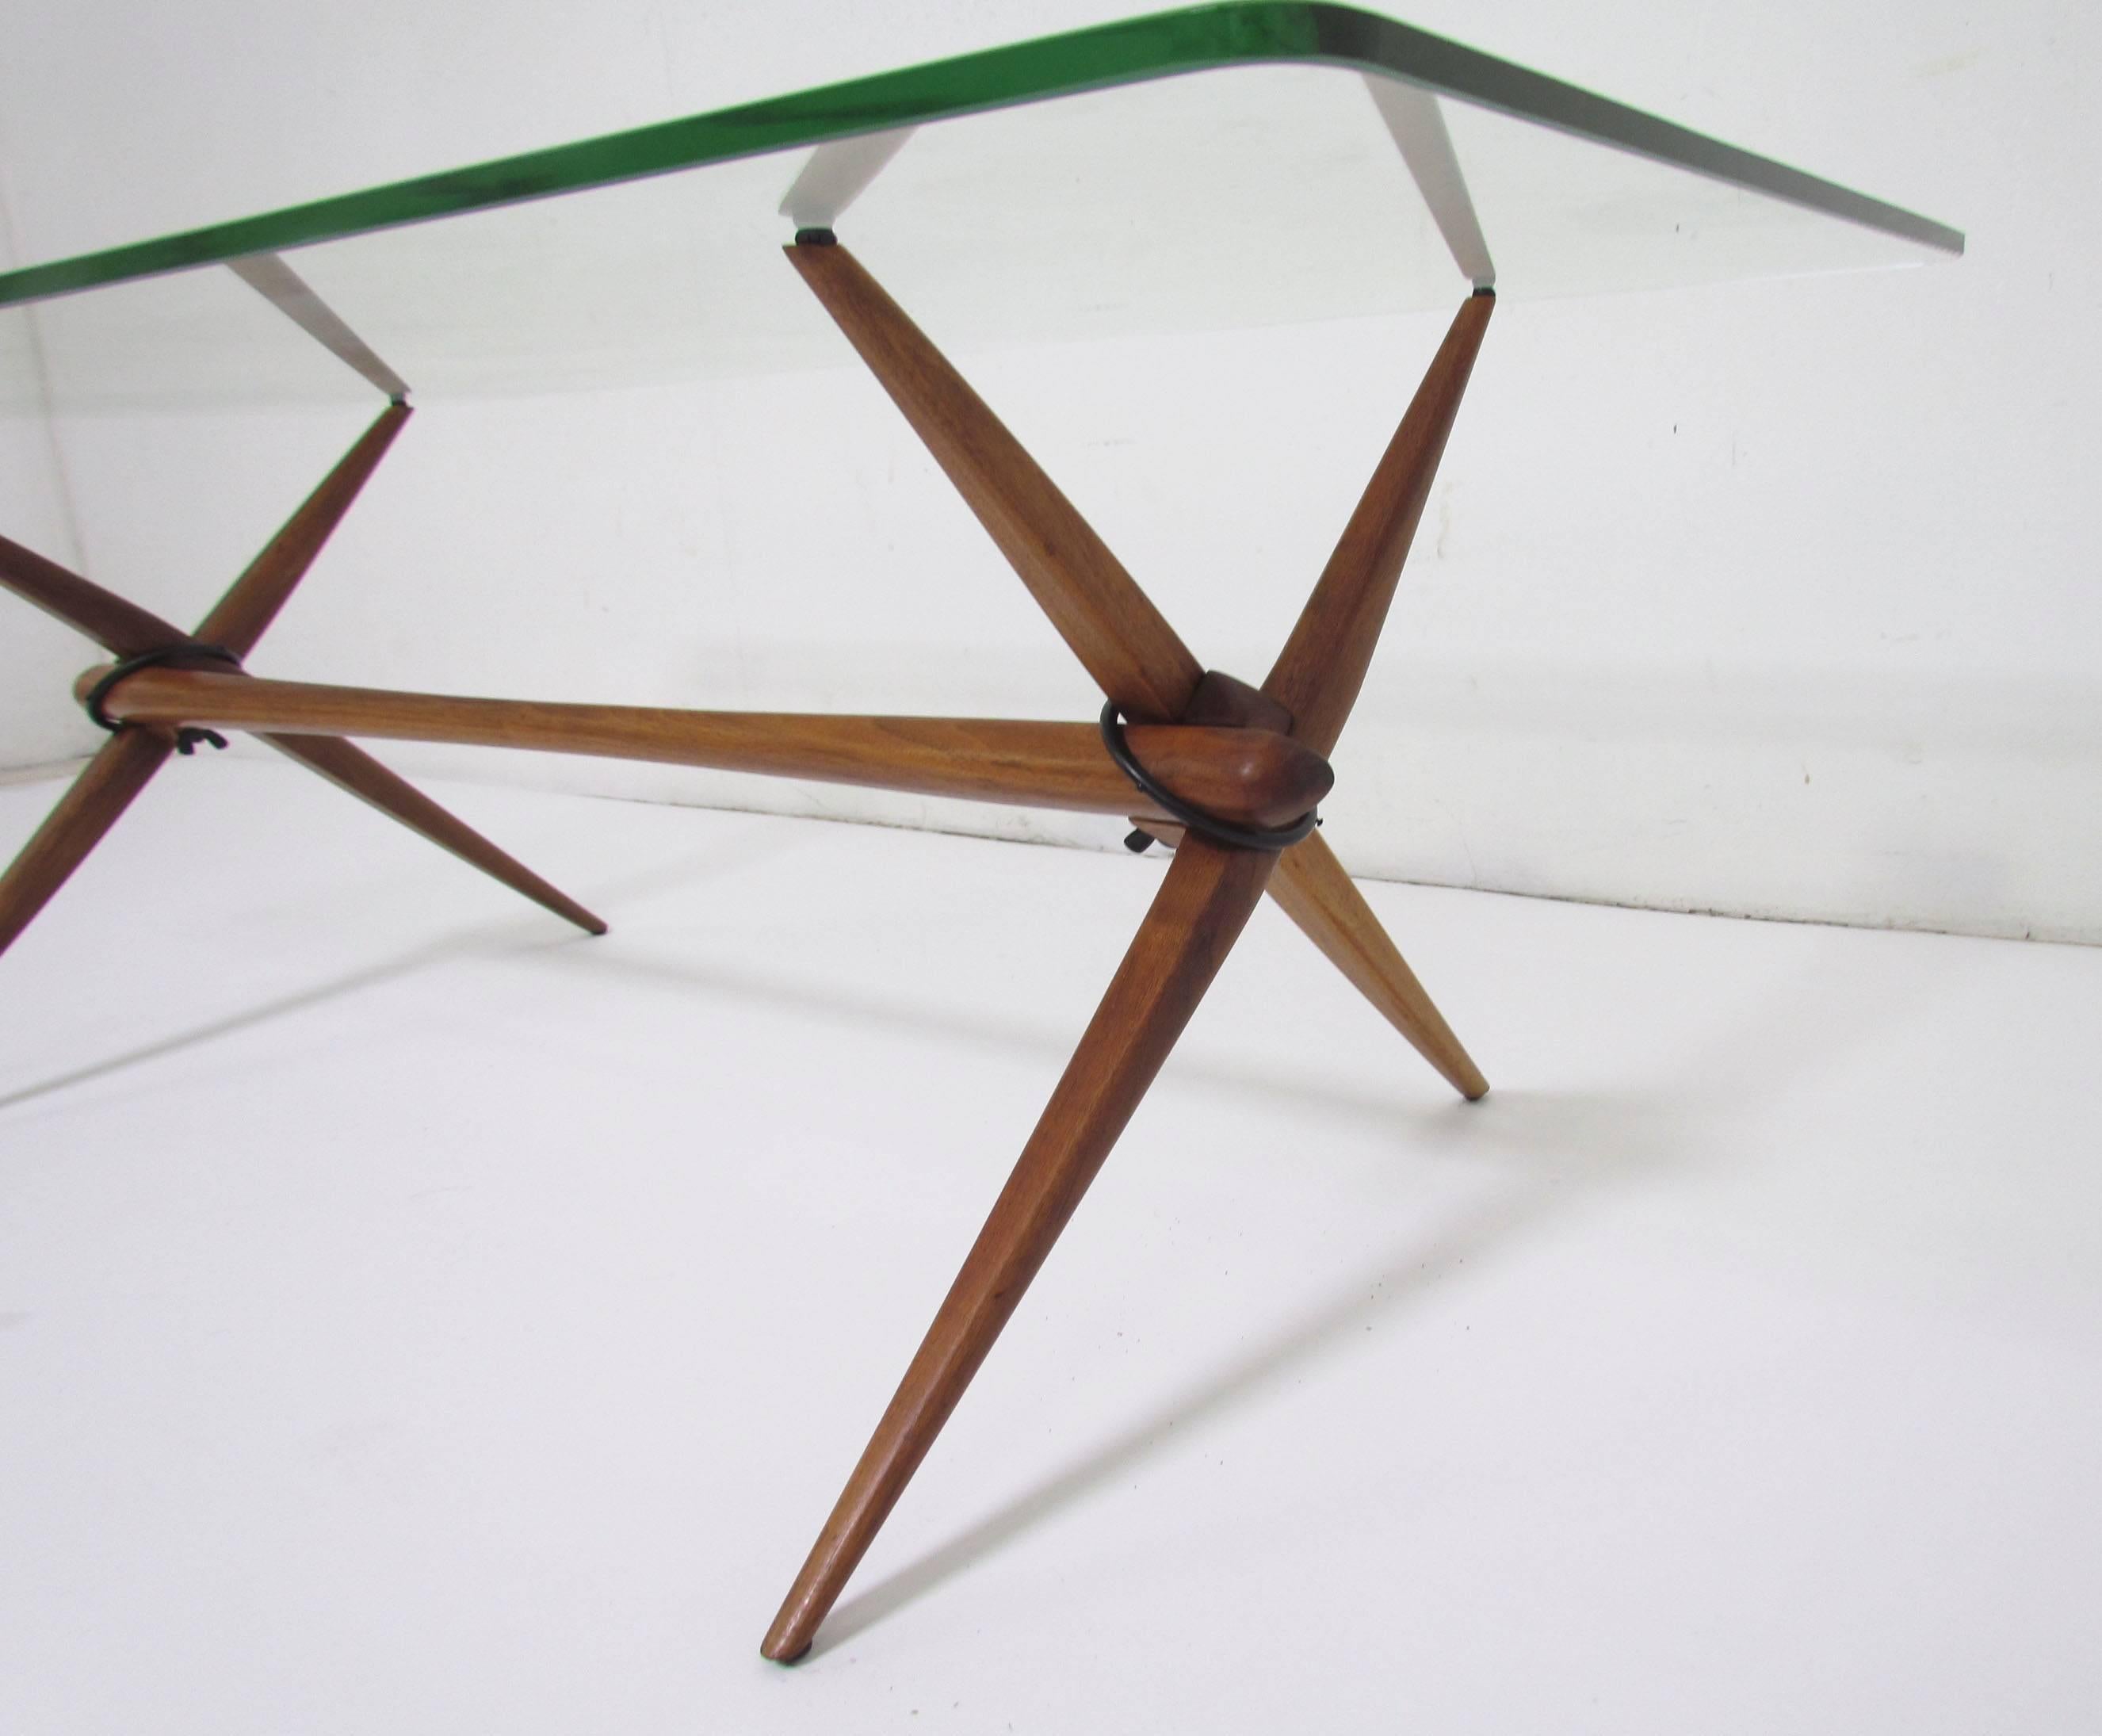 Mid-Century Modern coffee table in teak with sawhorse legs, glass top with rounded corners. Includes optional tray for displaying small objects or plants, circa 1960s. Although Danish modern in design, the table legs feature an ingenious 